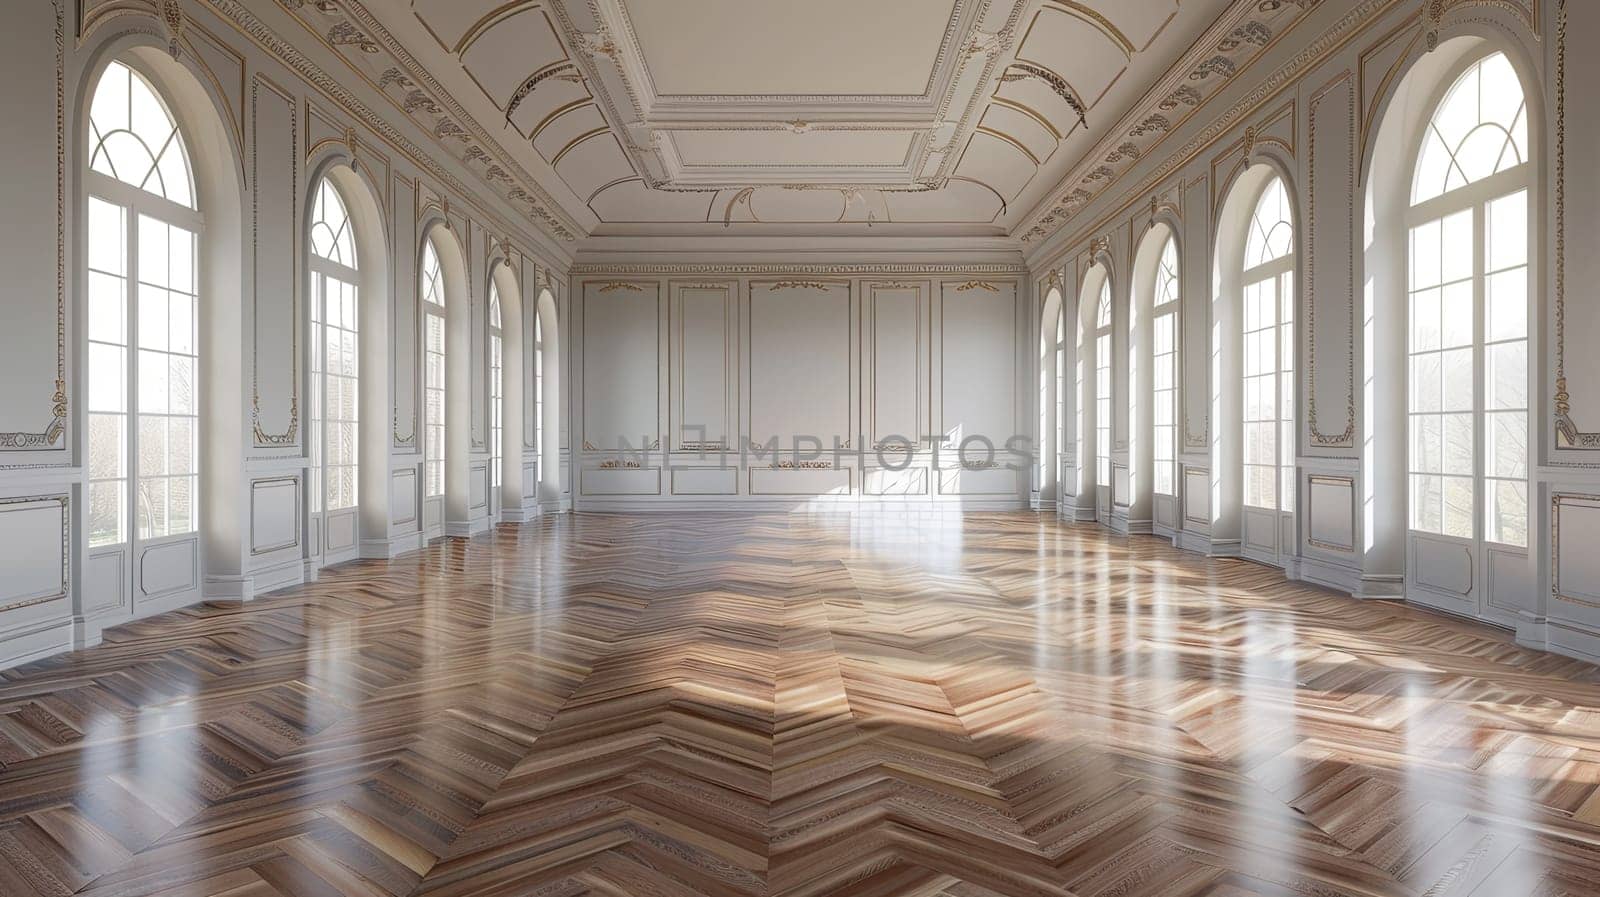 A vintage-style banquet hall with a parquet floor, empty and filled with natural light from large windows.